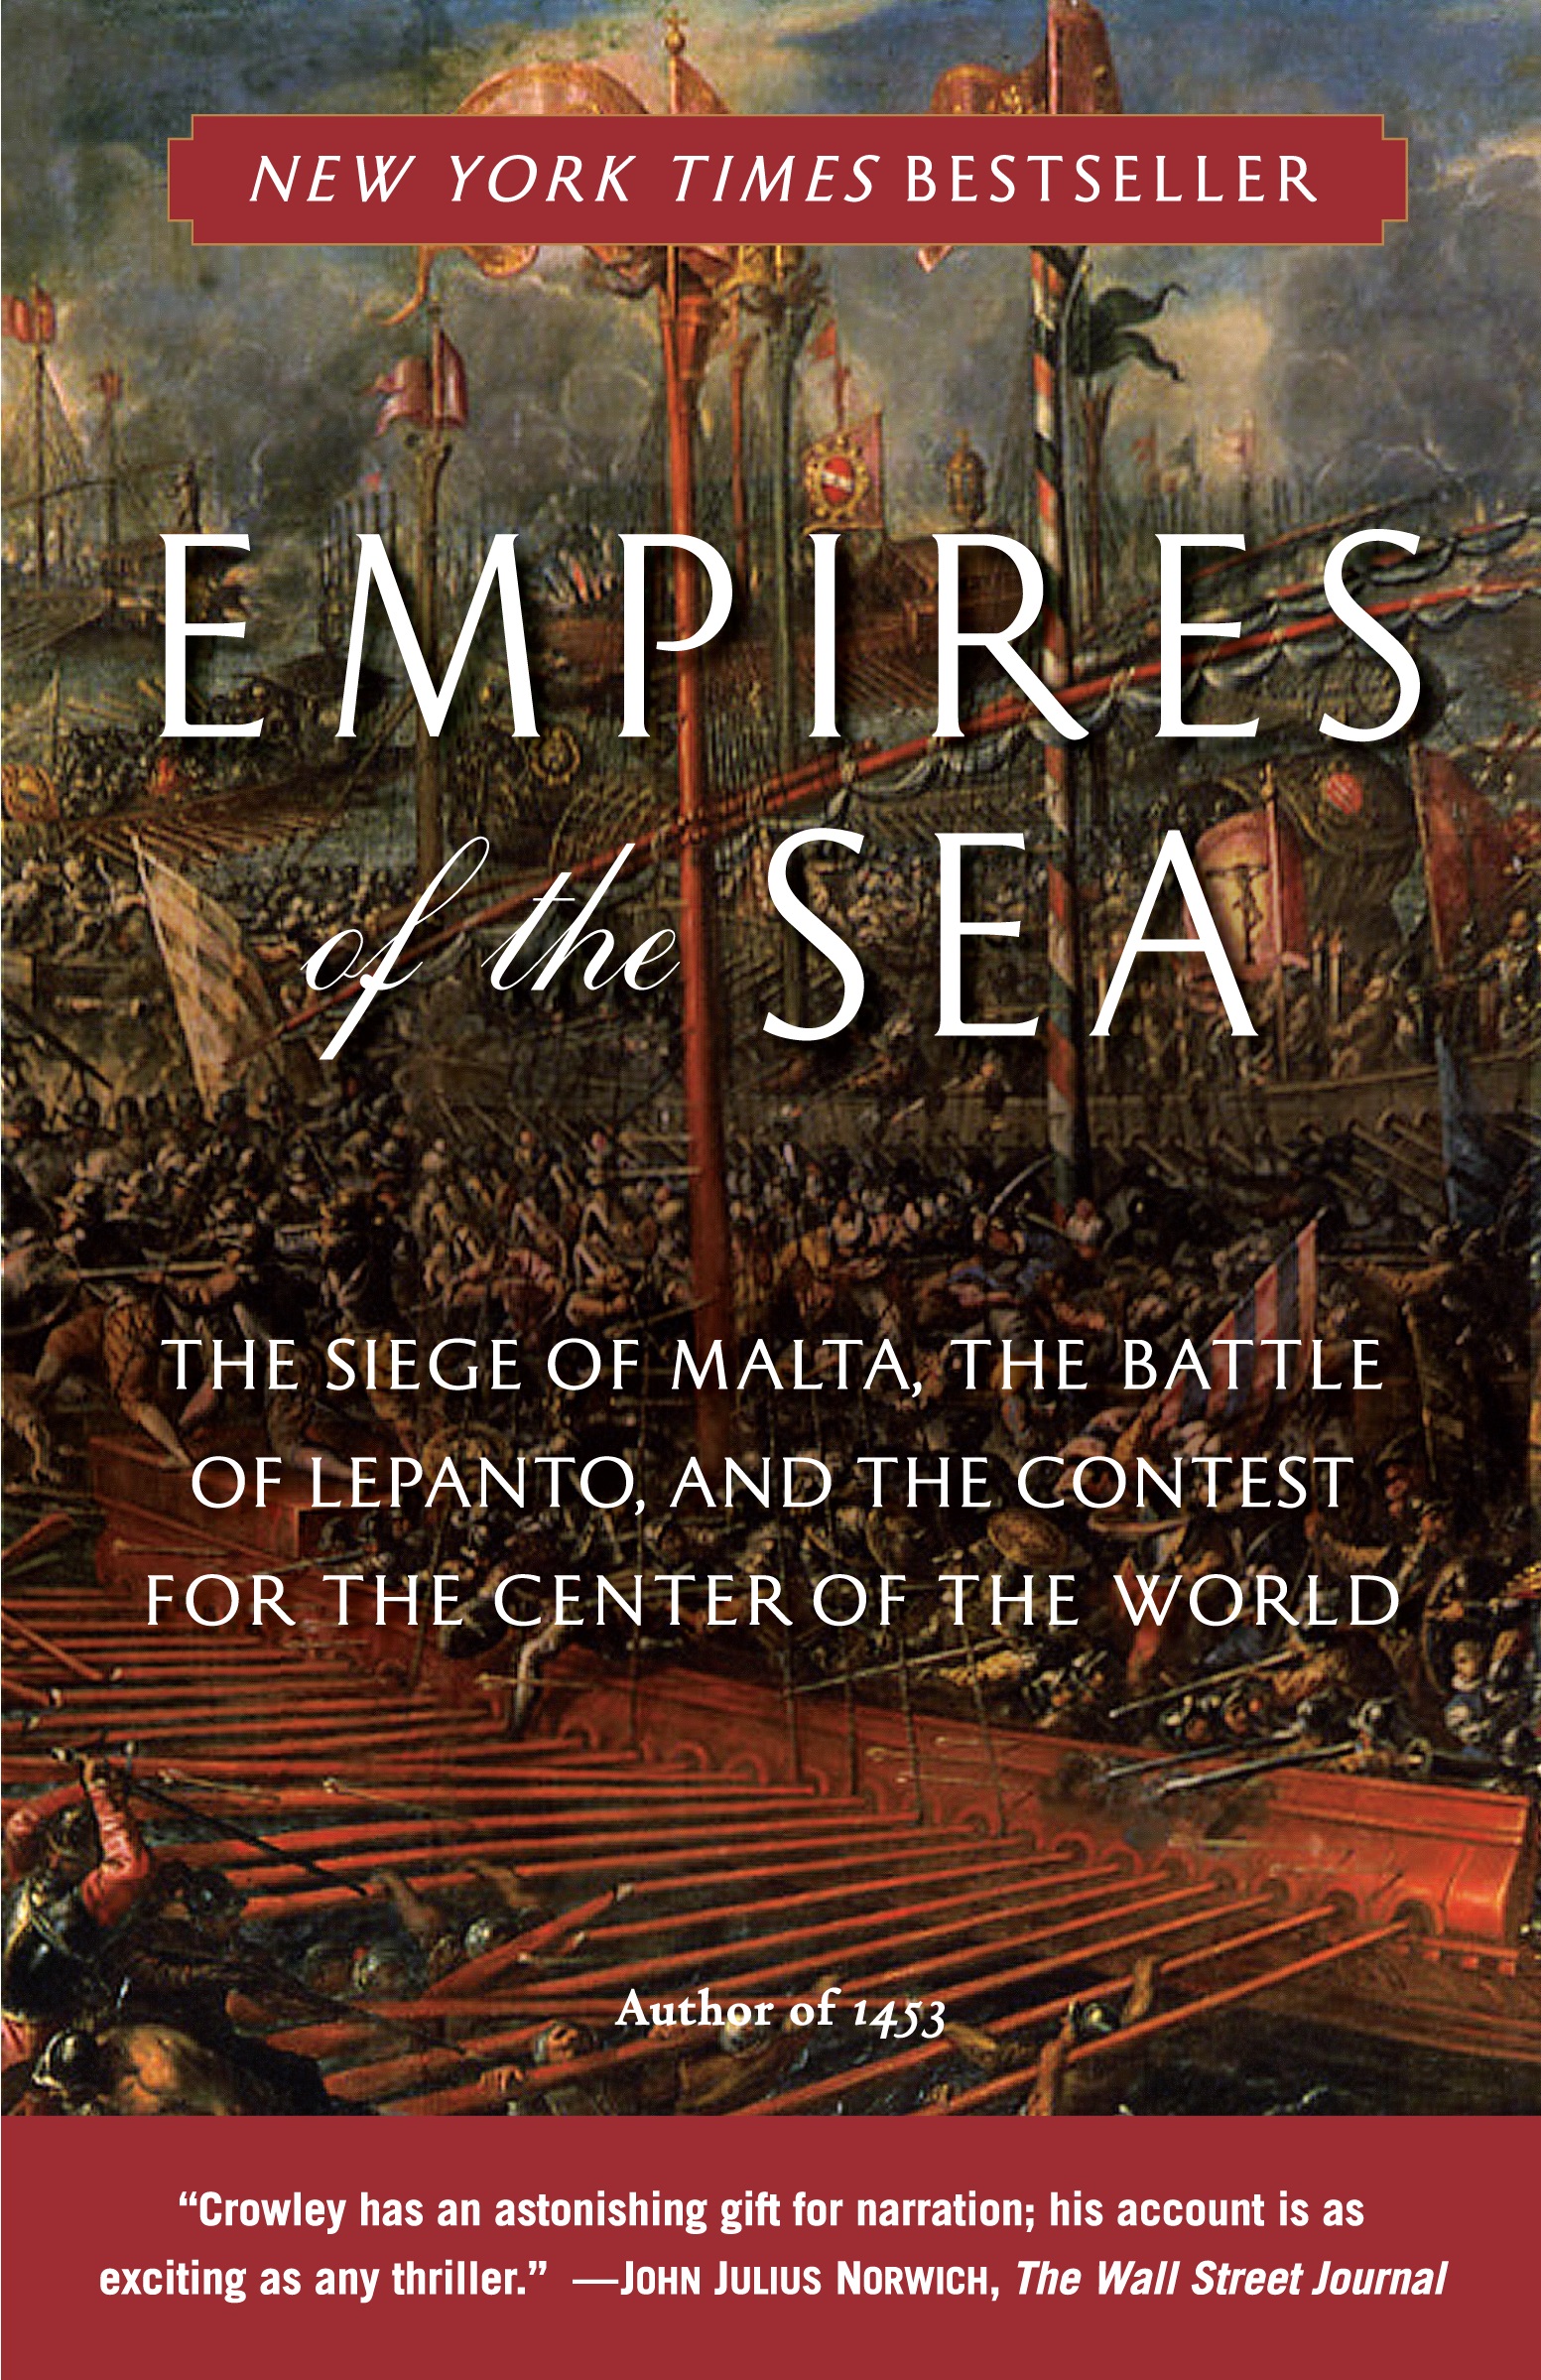 Empires of the Sea - The Siege Of Malta, The Battle Of Lepanto, And The Contest For The Center Of The World